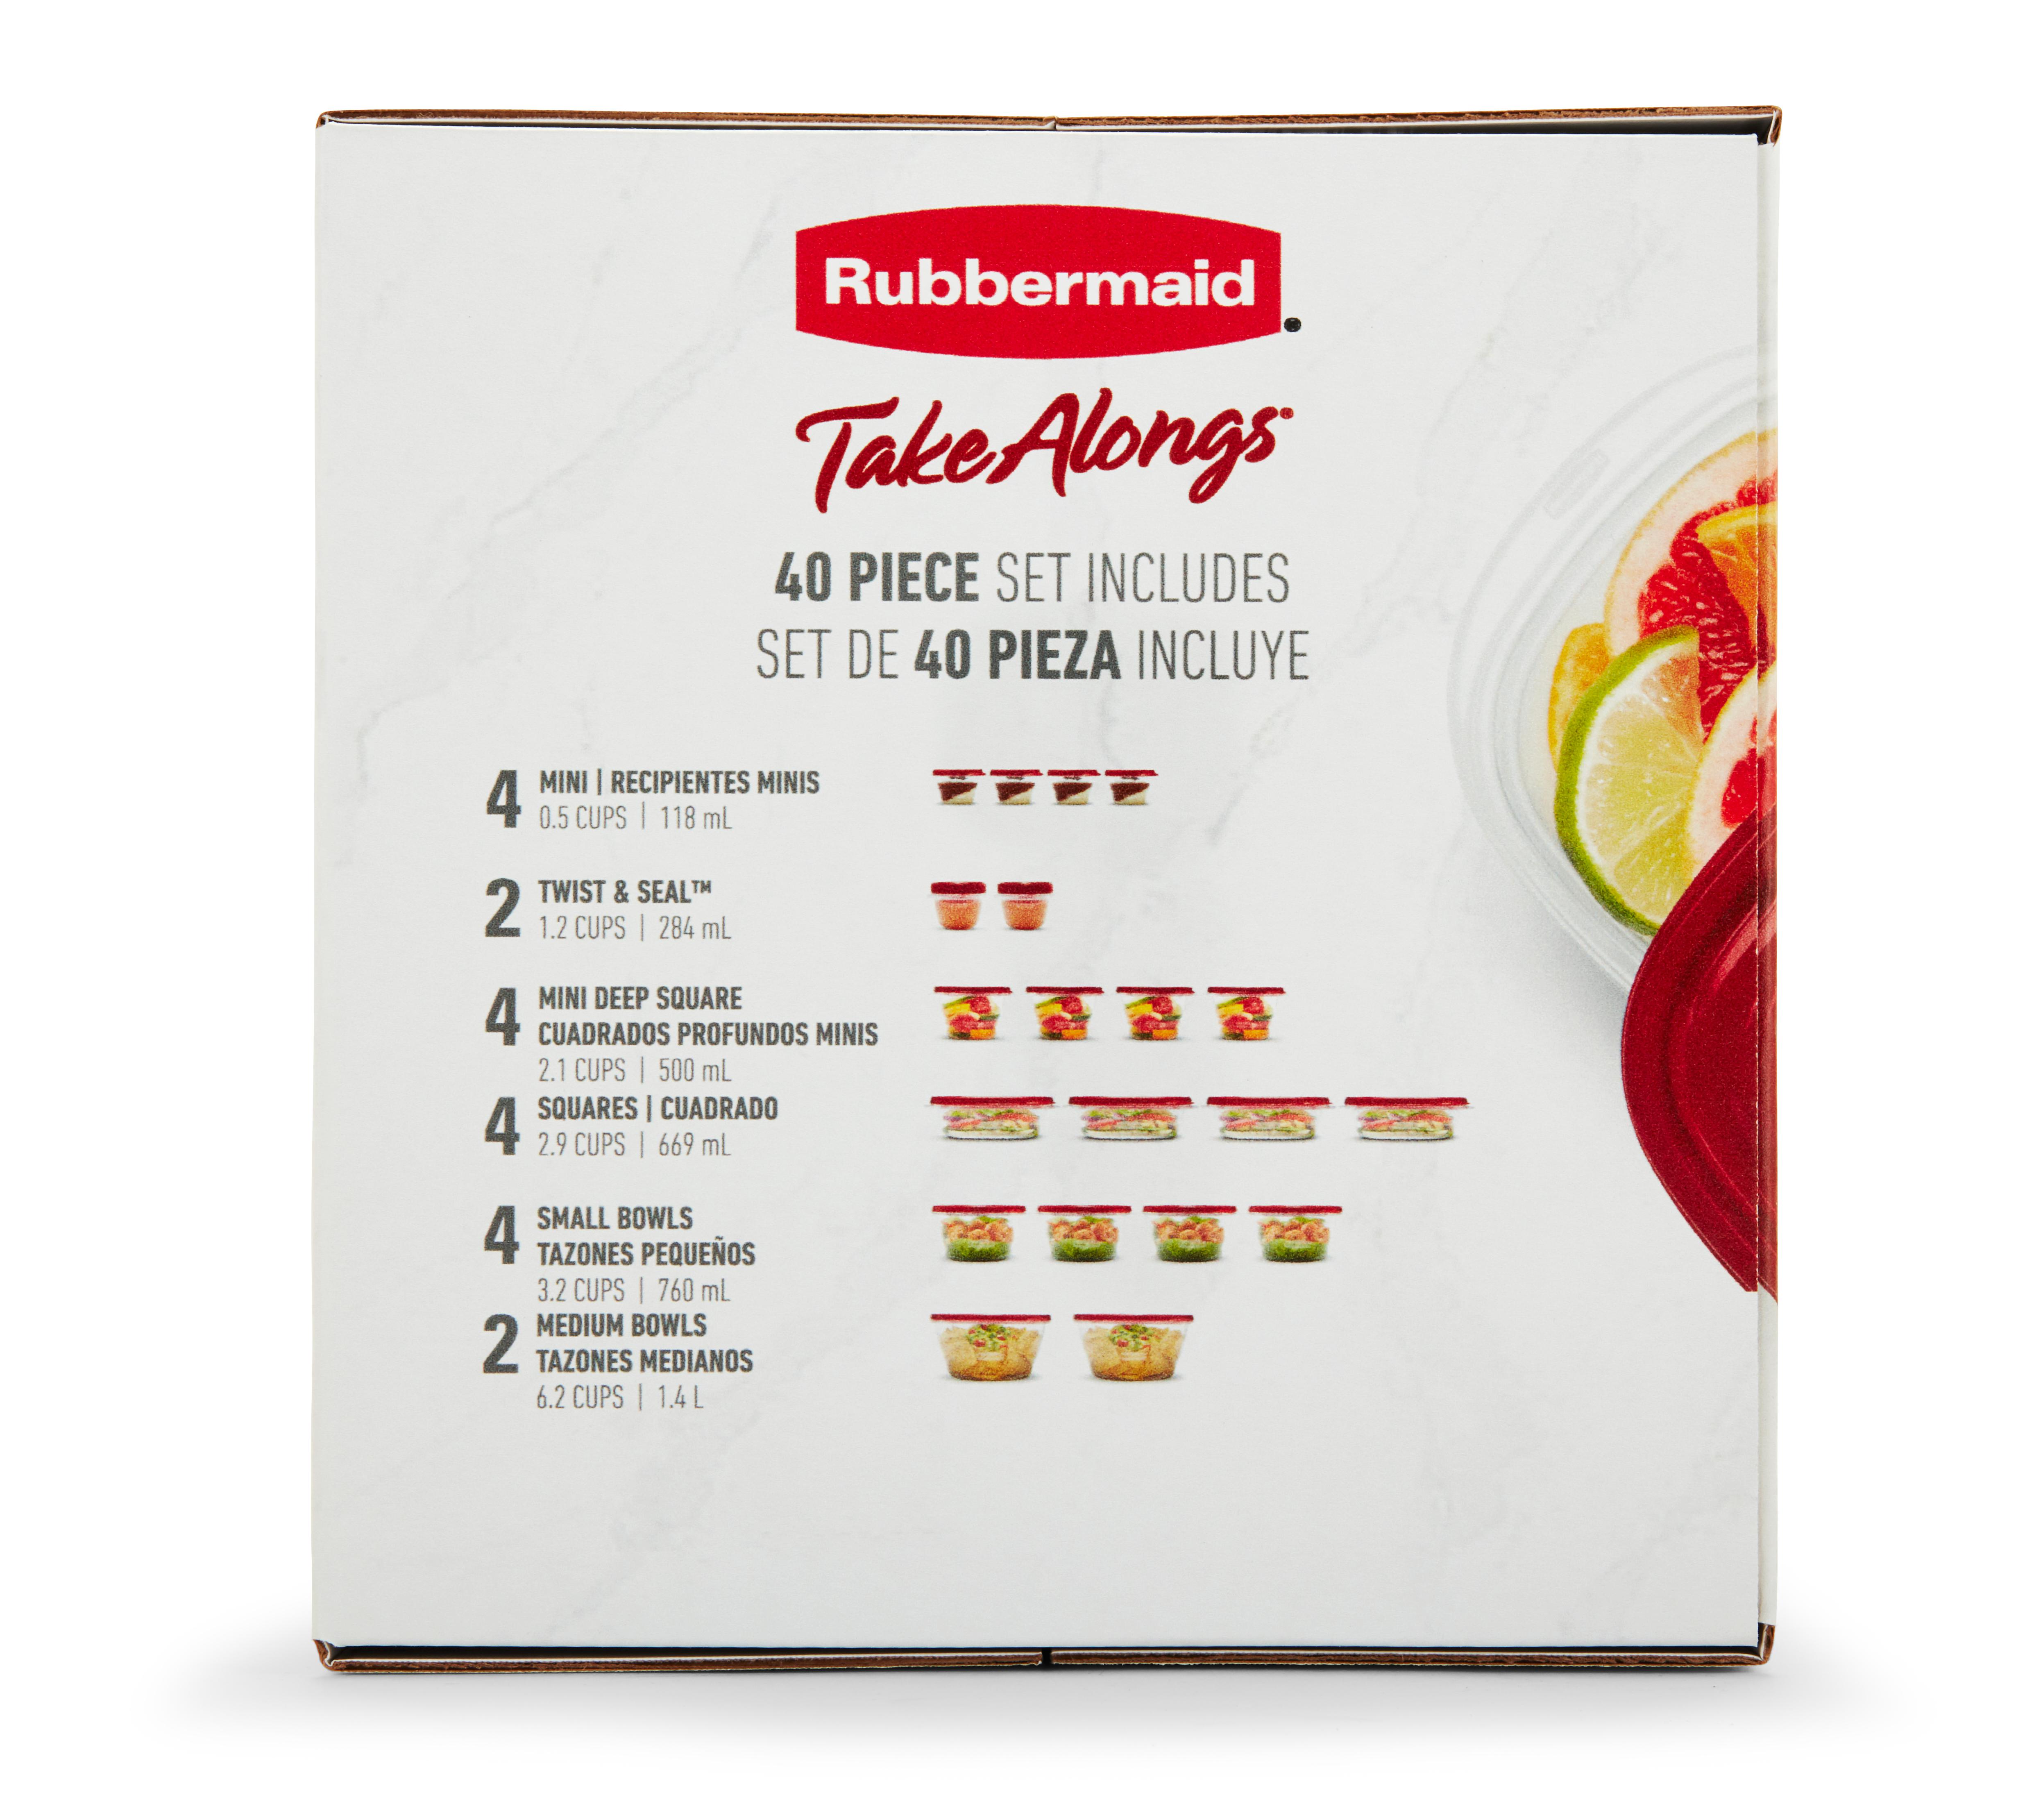 Rubbermaid TakeAlongs Food Storage Containers, Red, 40 Piece Set - image 5 of 9